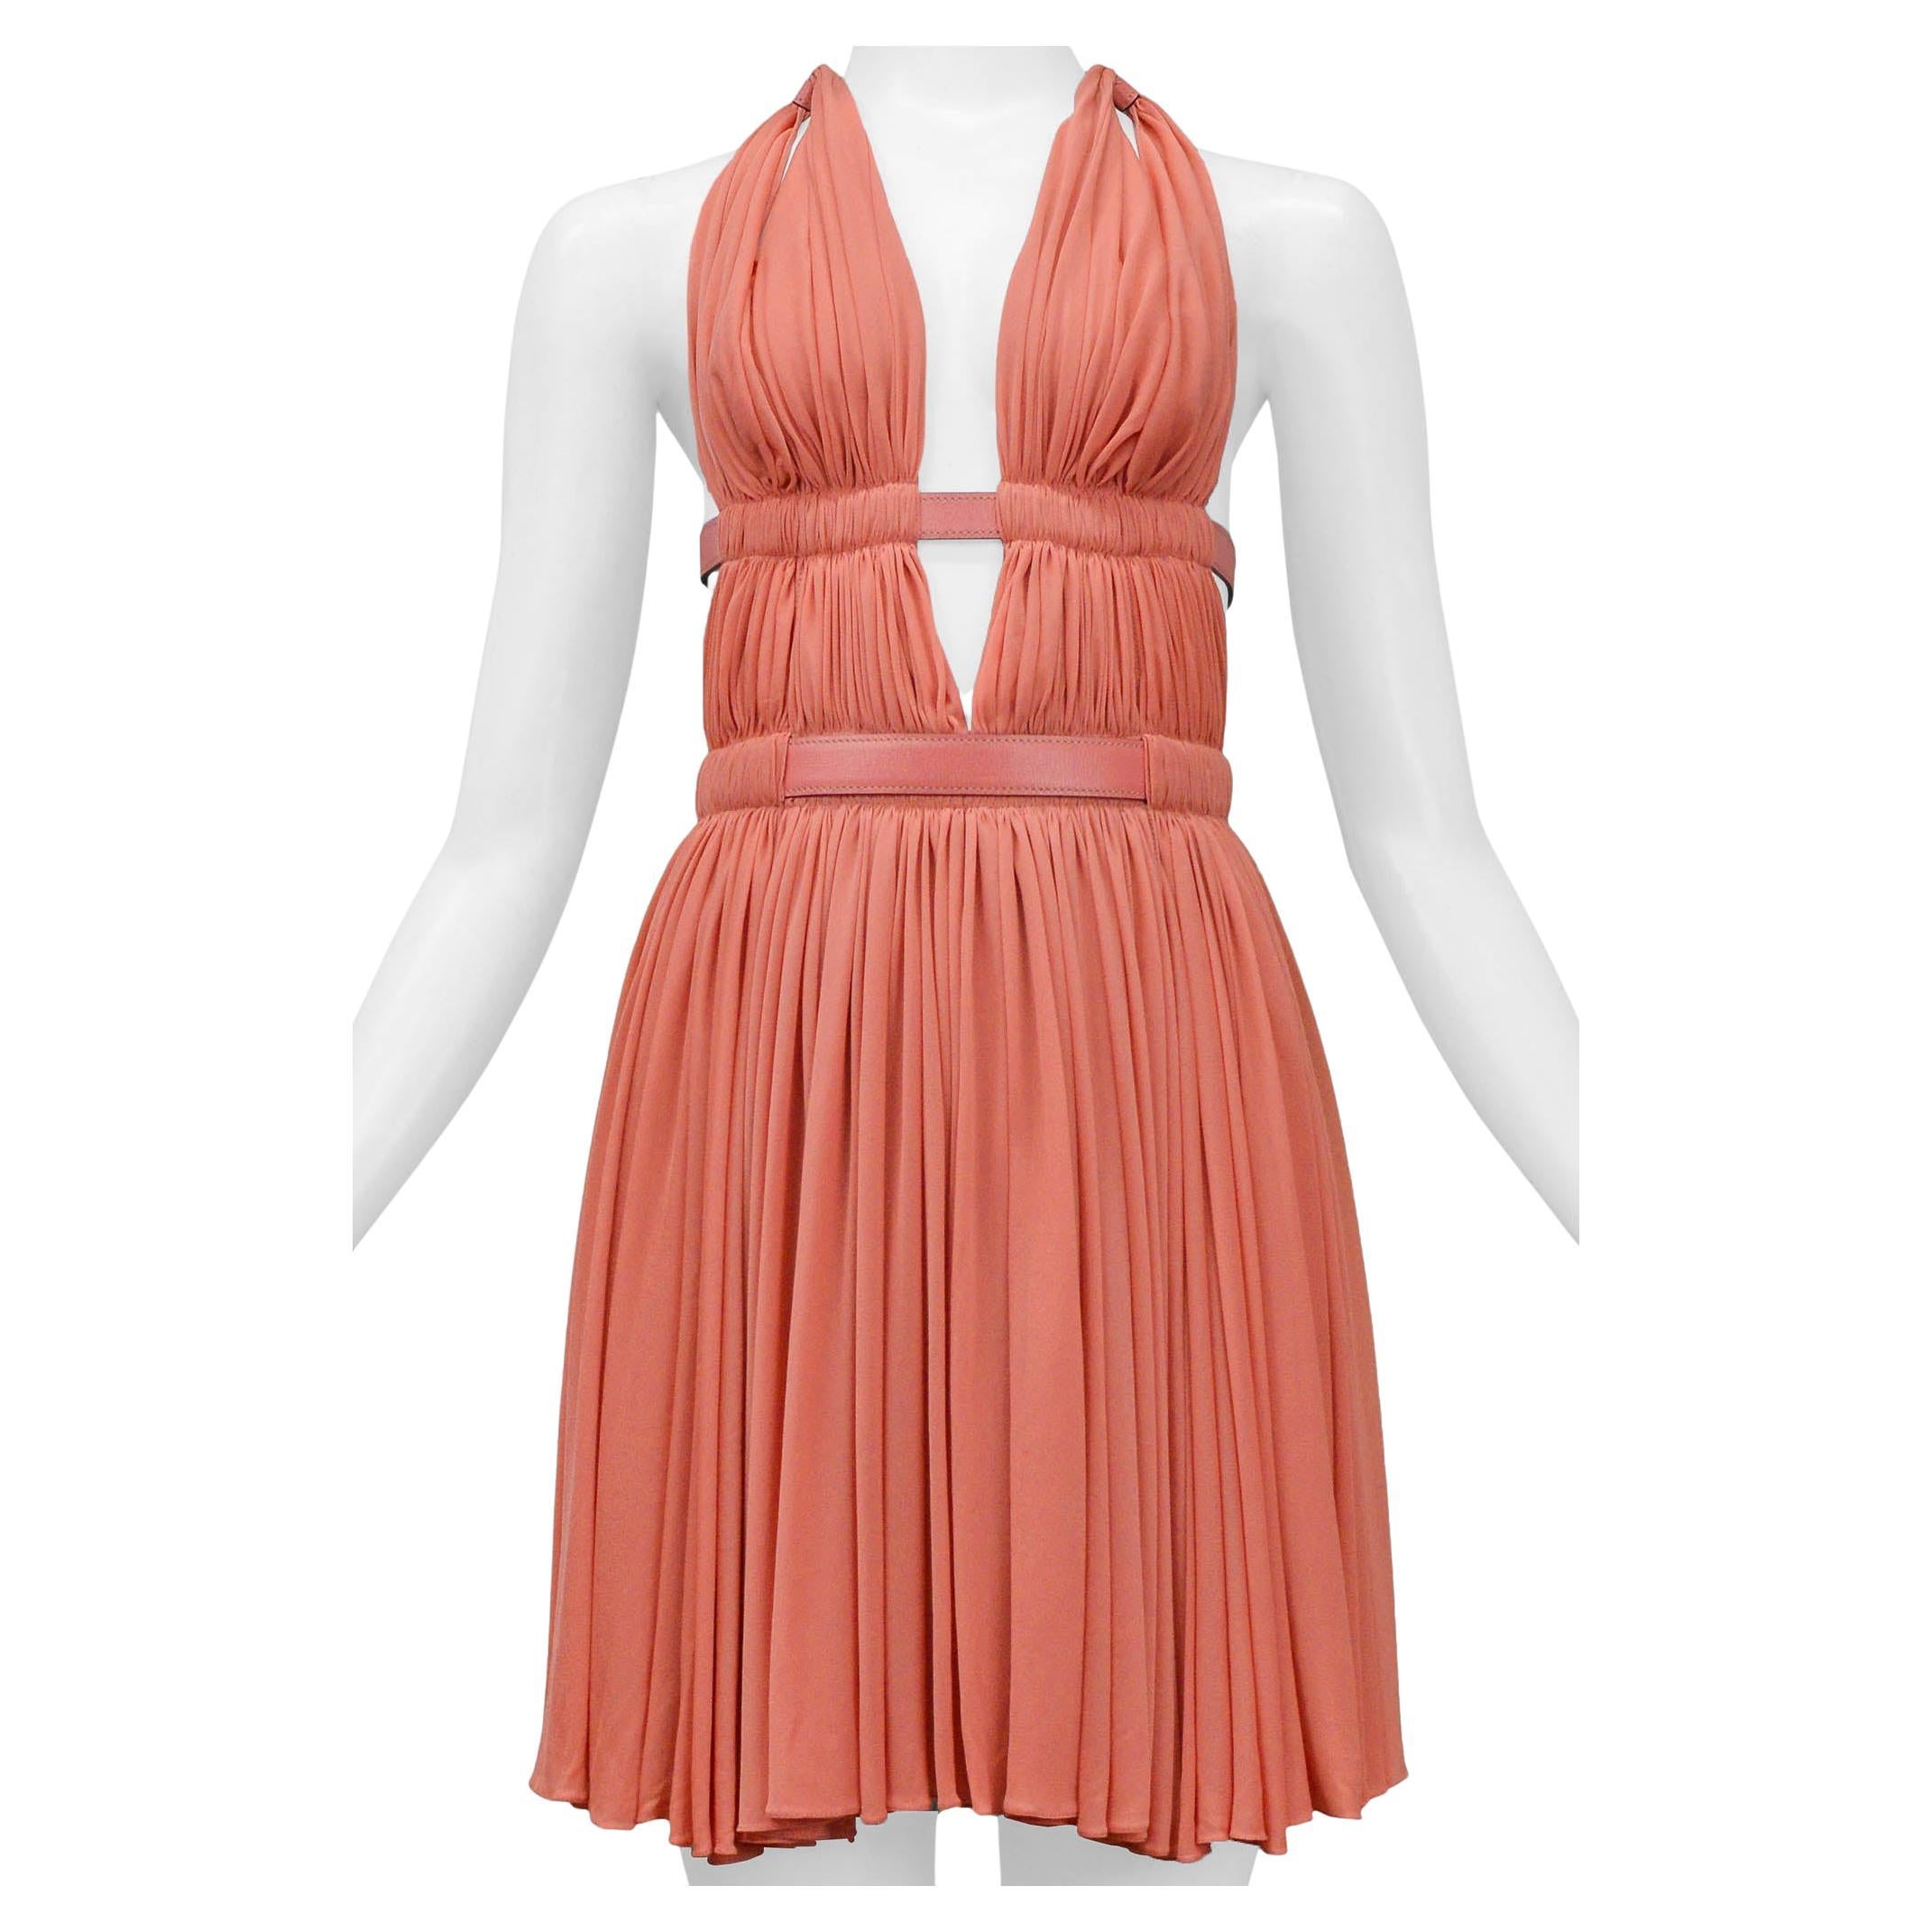 Resurrection Vintage is excited to offer a vintage Azzedine Alaia coral halter dress featuring a deep v, adjustable leather straps with buckles on the neck and back, pleated panels with open slit sides, and peekaboo slits at the back. 

Alaia